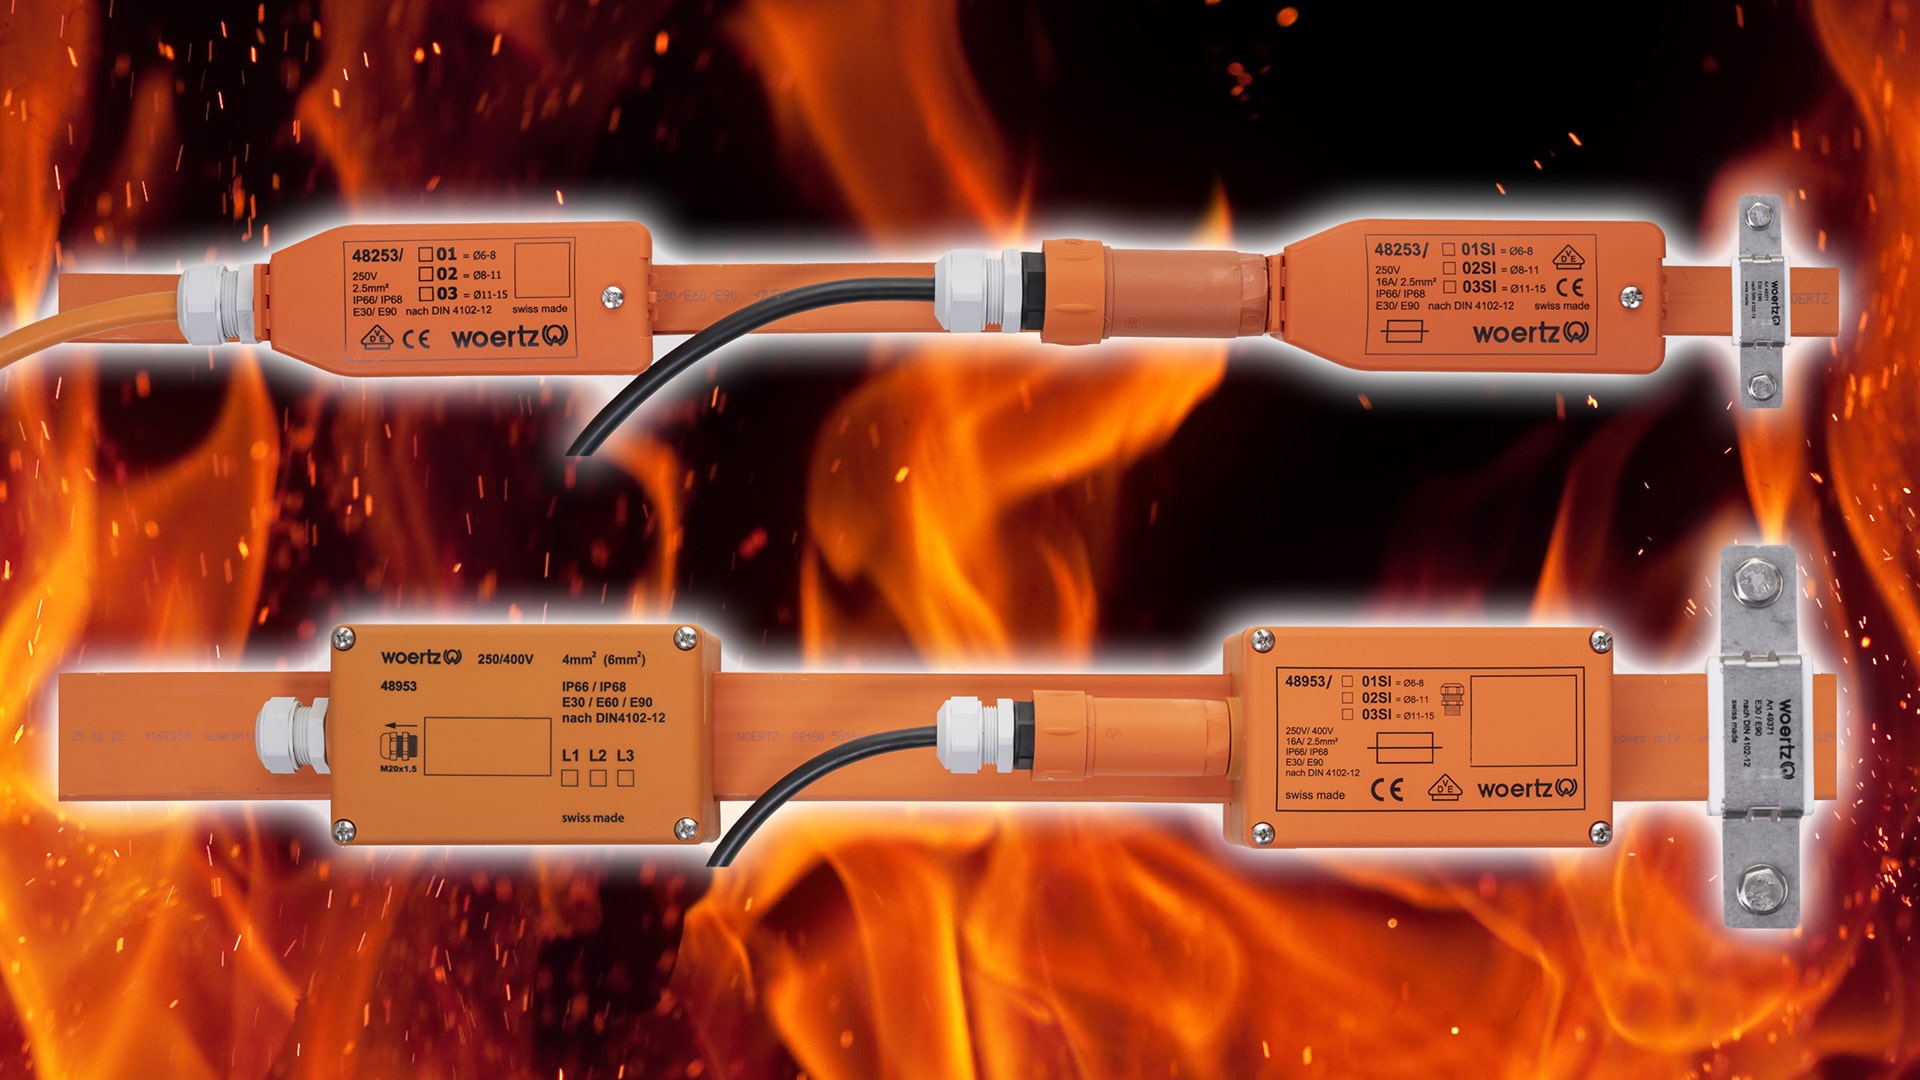 woertz fire-safety systems